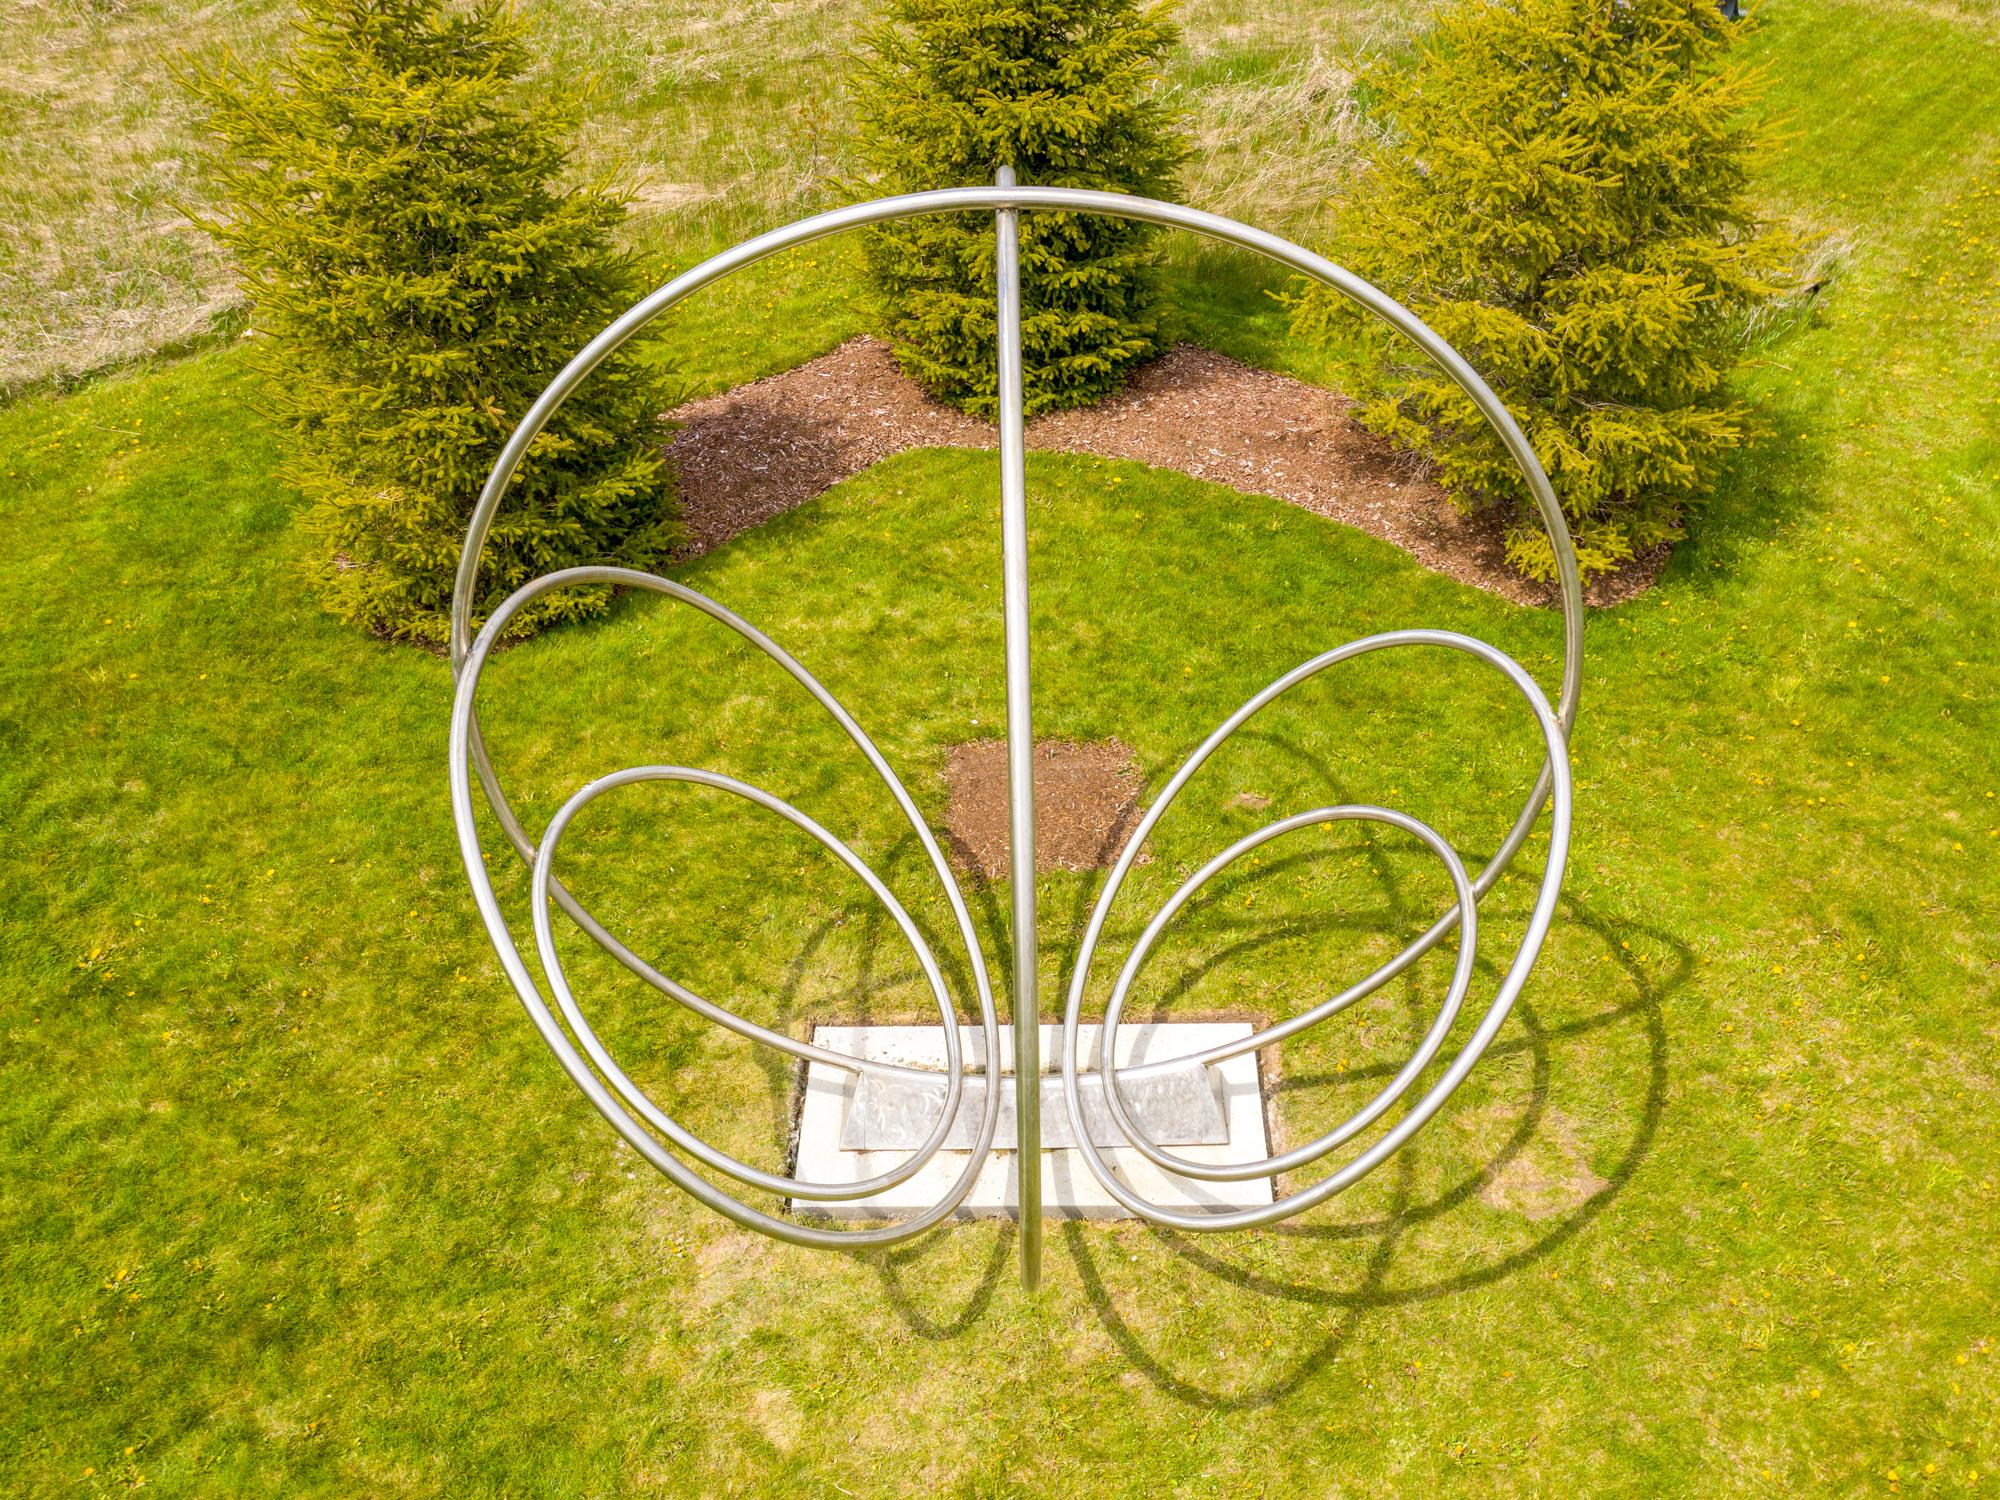 Canadian artist Jake Goertzen creates a symmetrical design with six stainless steel rings in this elegant outdoor sculpture. 

